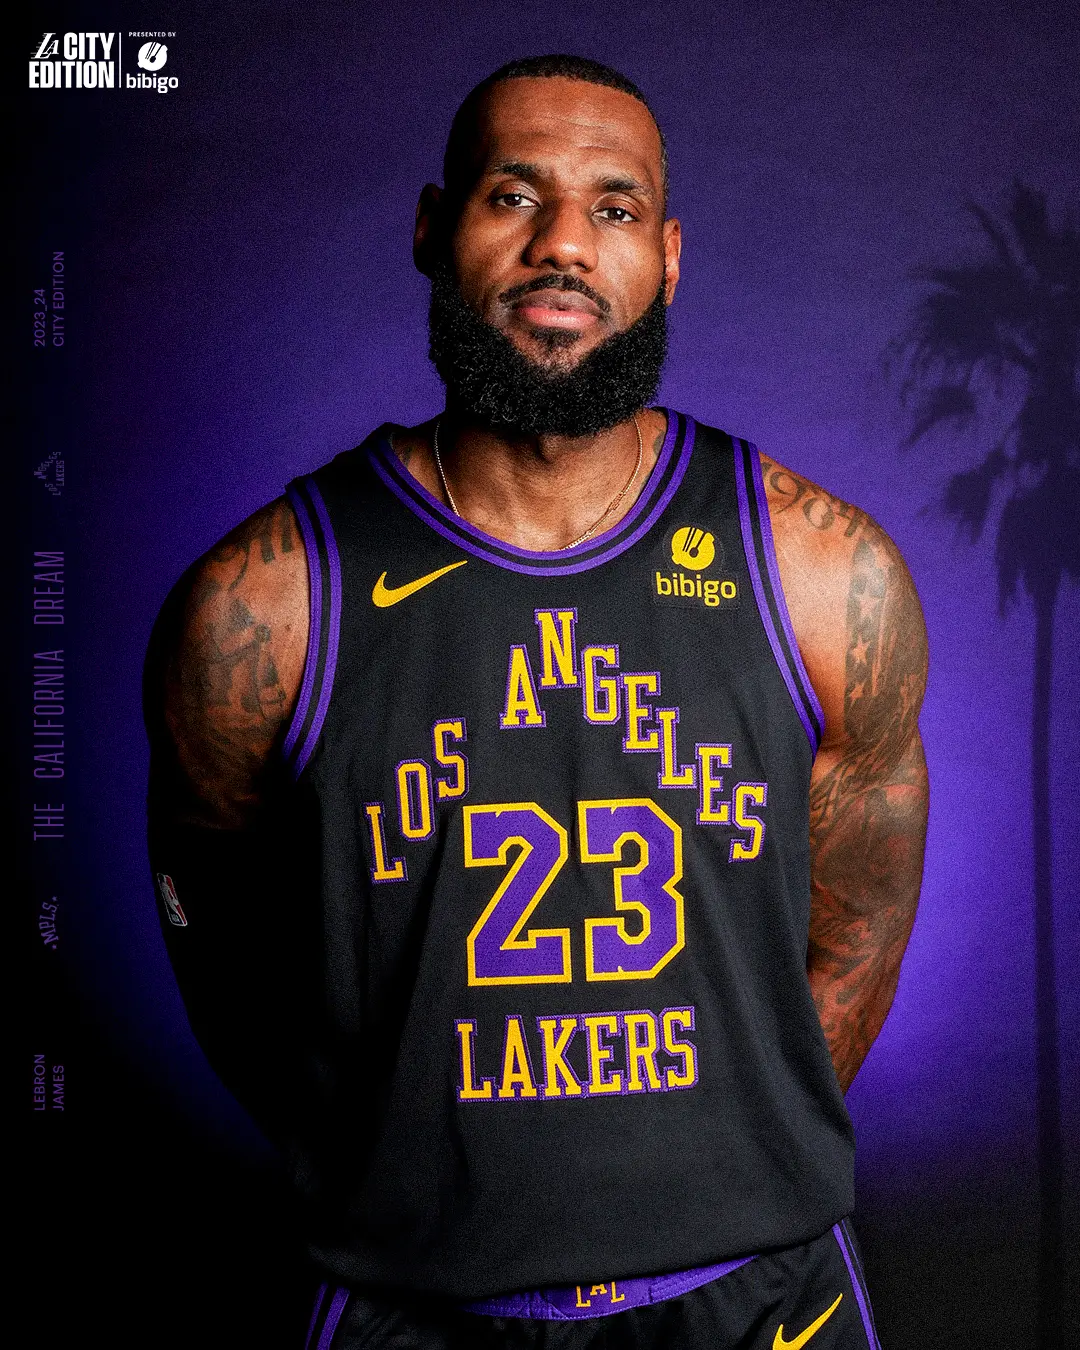 PHOTO GALLERY: Los Angeles Lakers launched a new jersey with black and purple as the main color